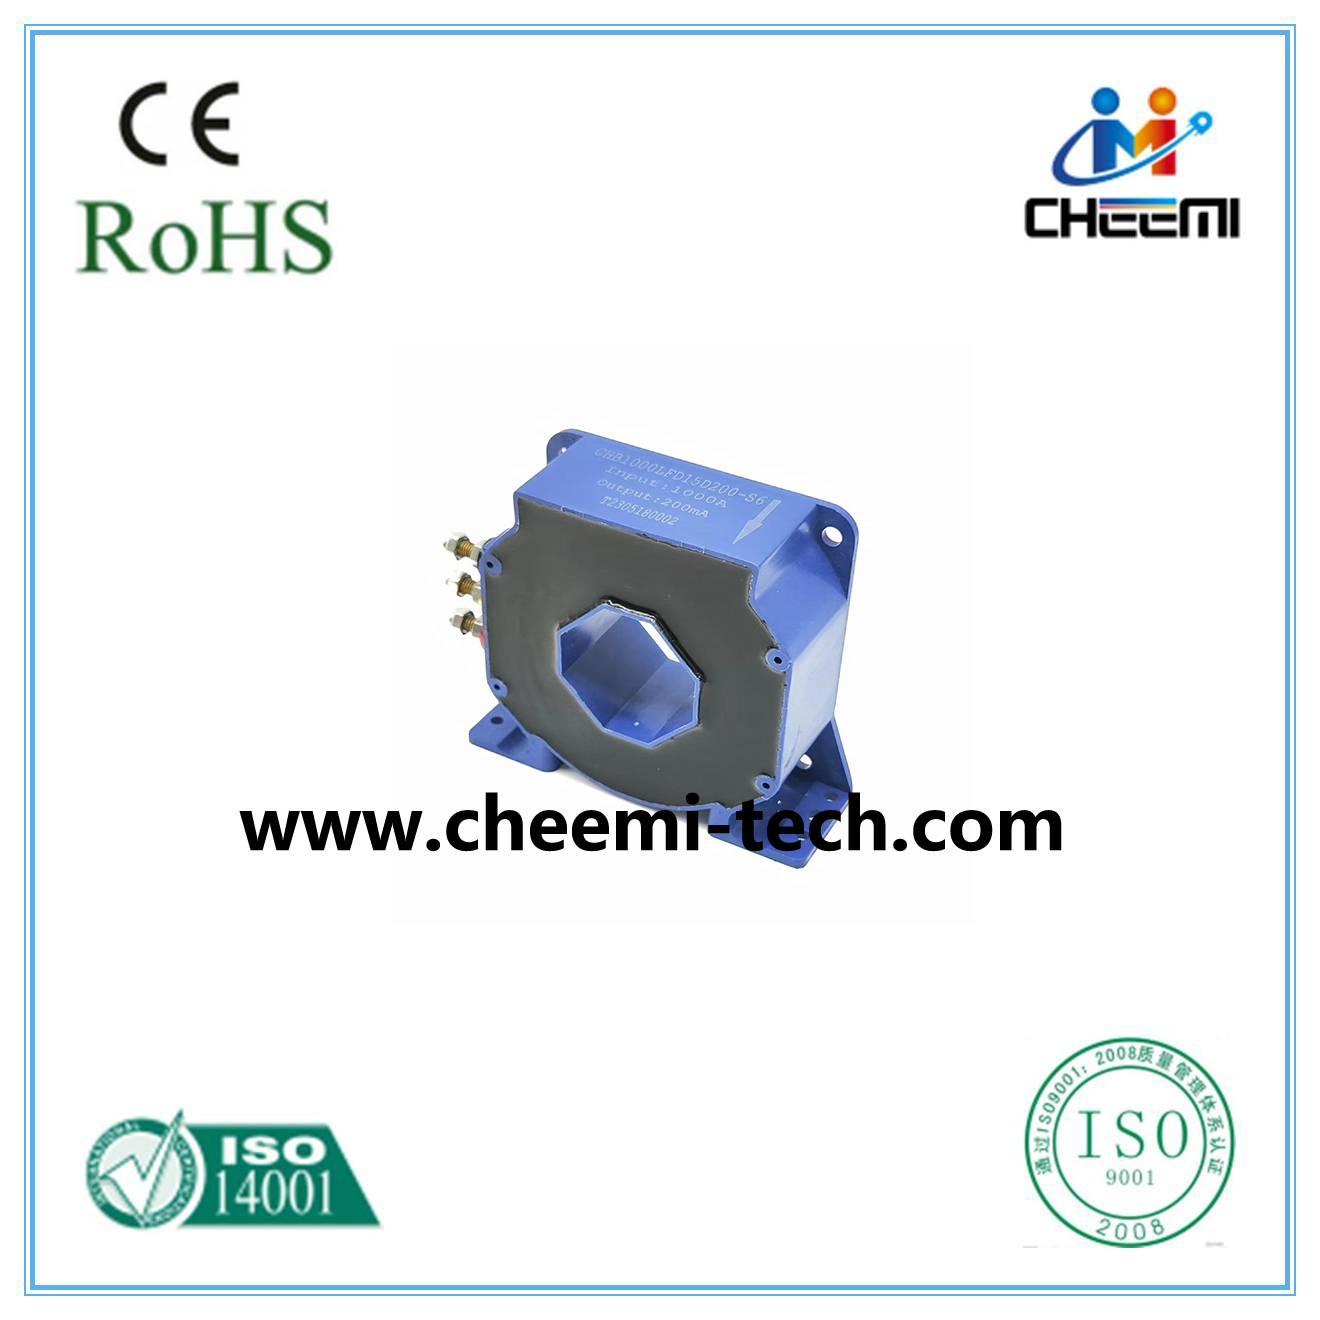 High-Accuracy-Current-Sensors-CHB1000LFD15D200-S6T2-Applied-In-railway